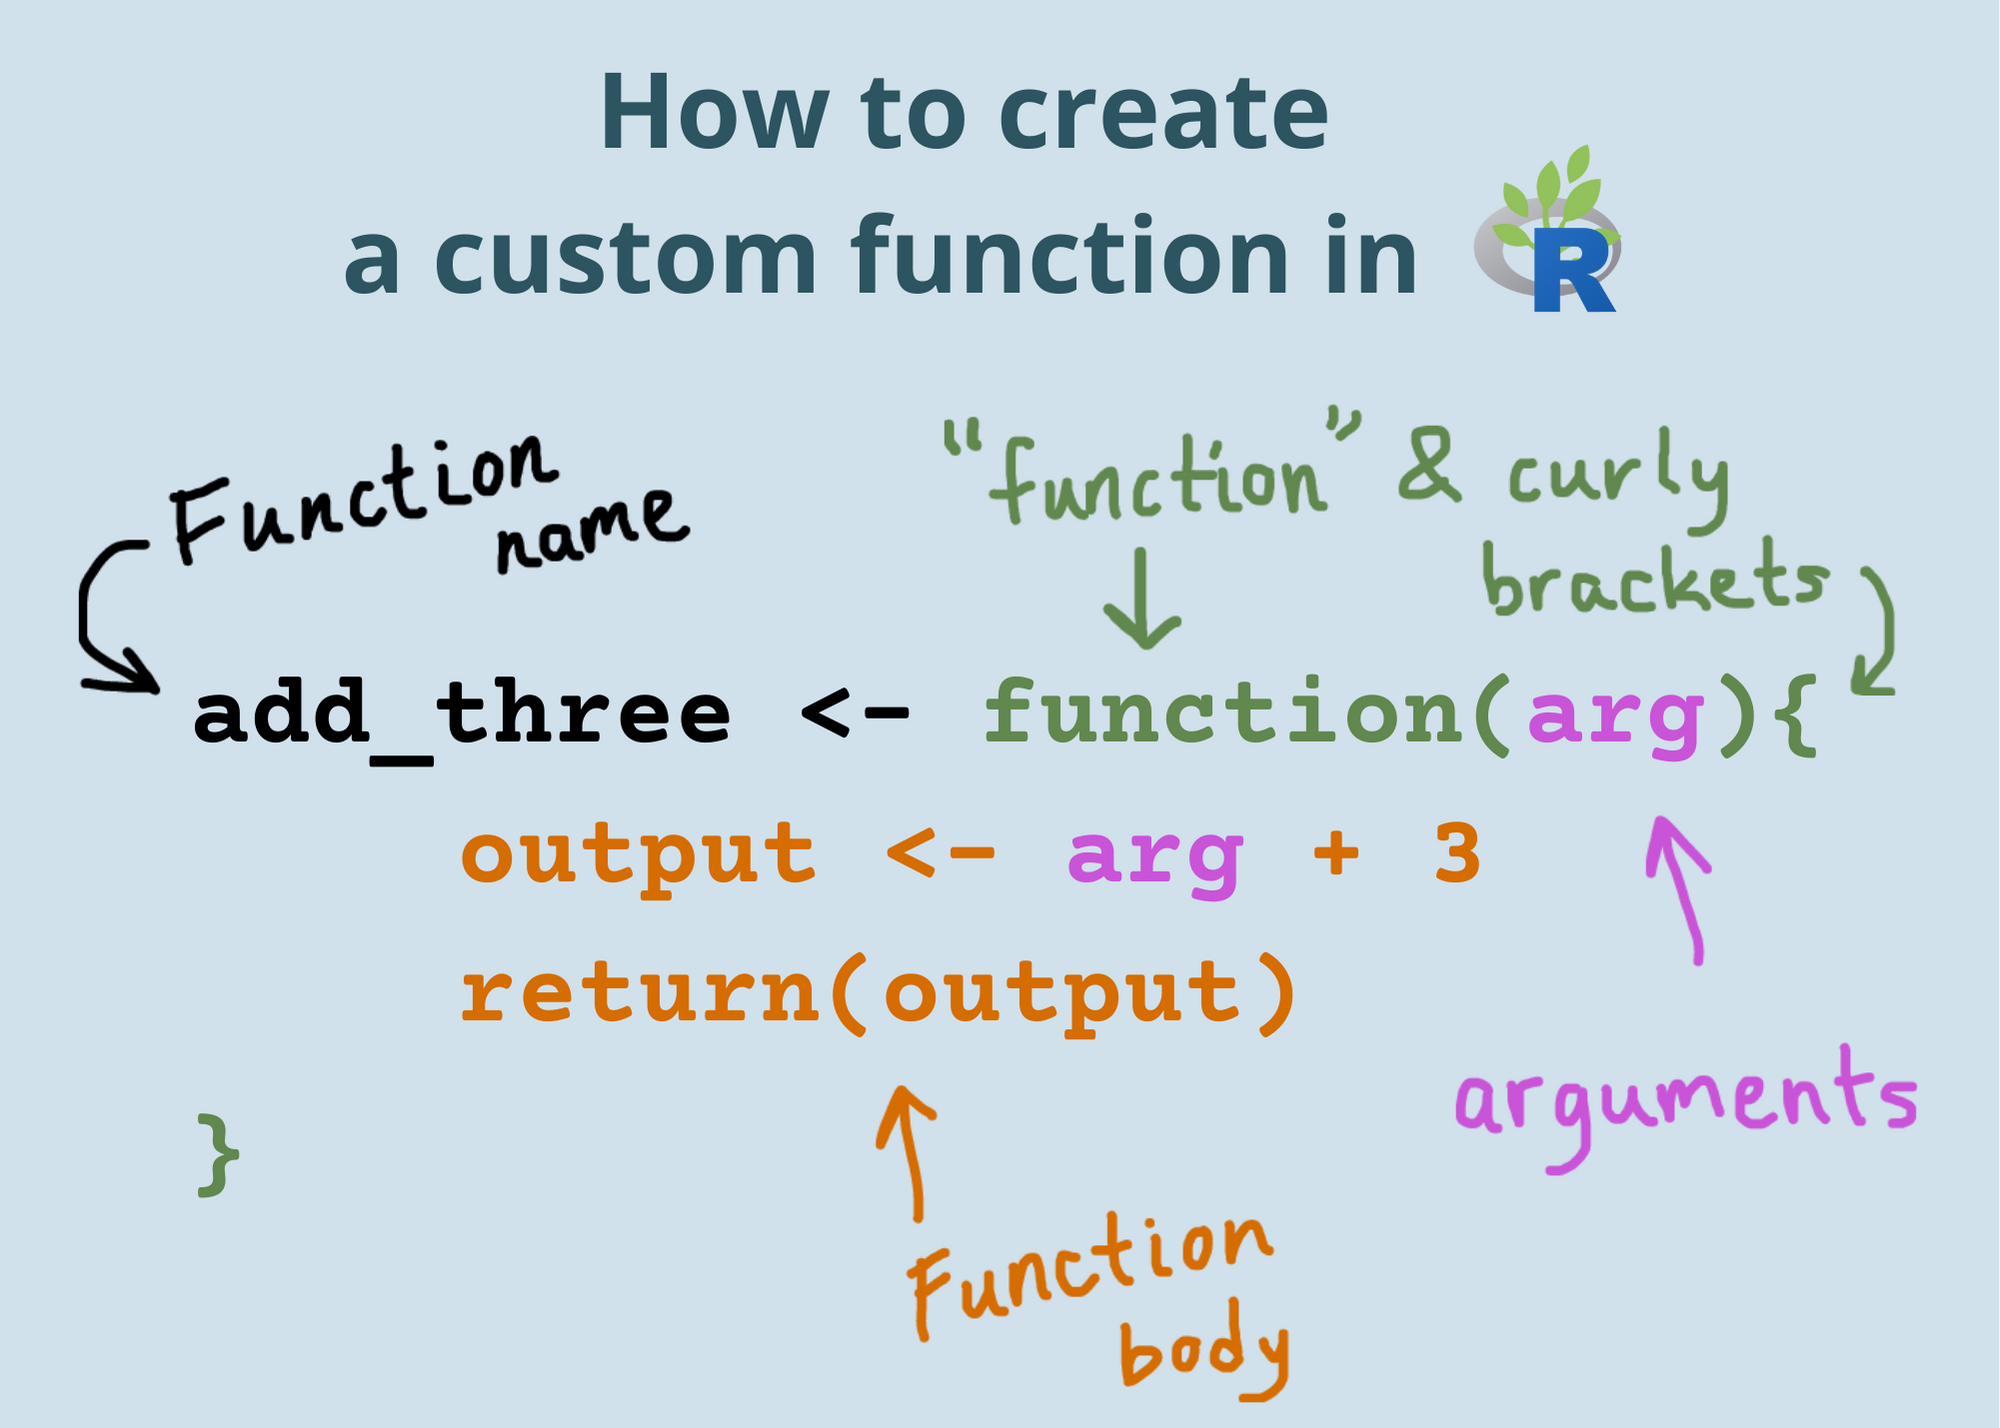 what is assign function in r